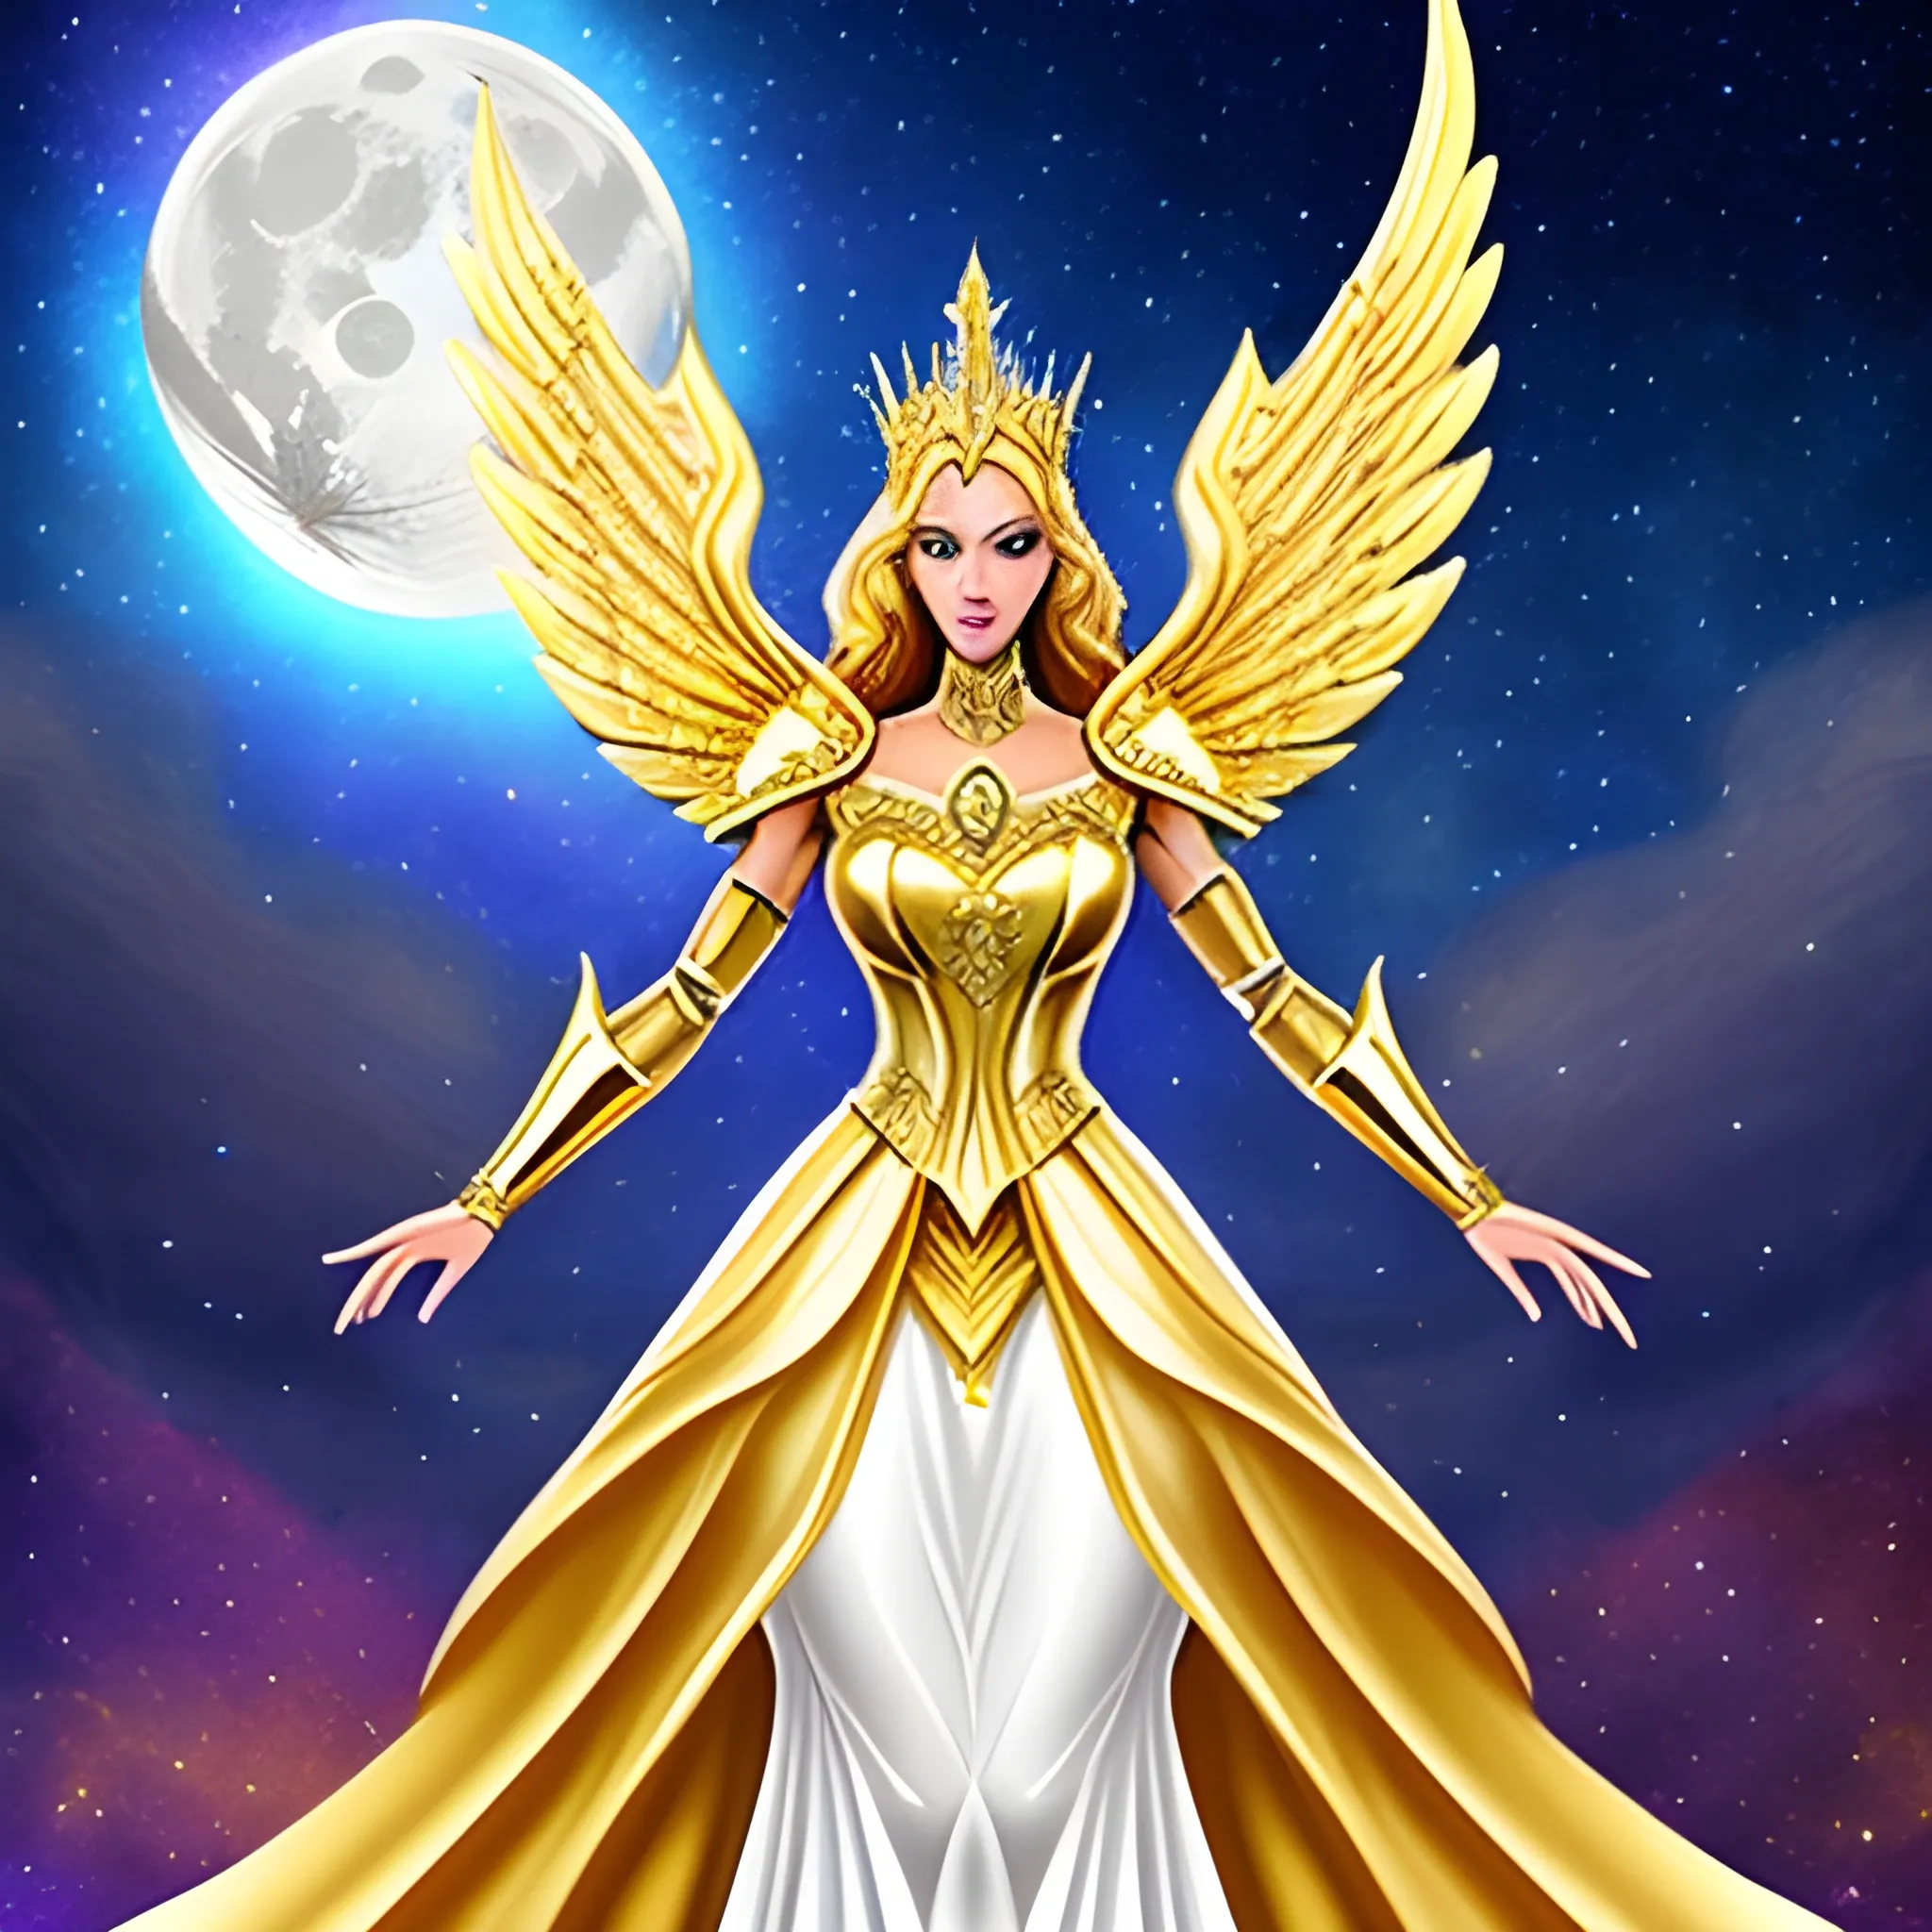 Golden galaxy goddess Angel fairy Queen princess dream wedding dress with cape and high collar warrior moon goddess armor majestic supreme powerful starchild thoth she-ra